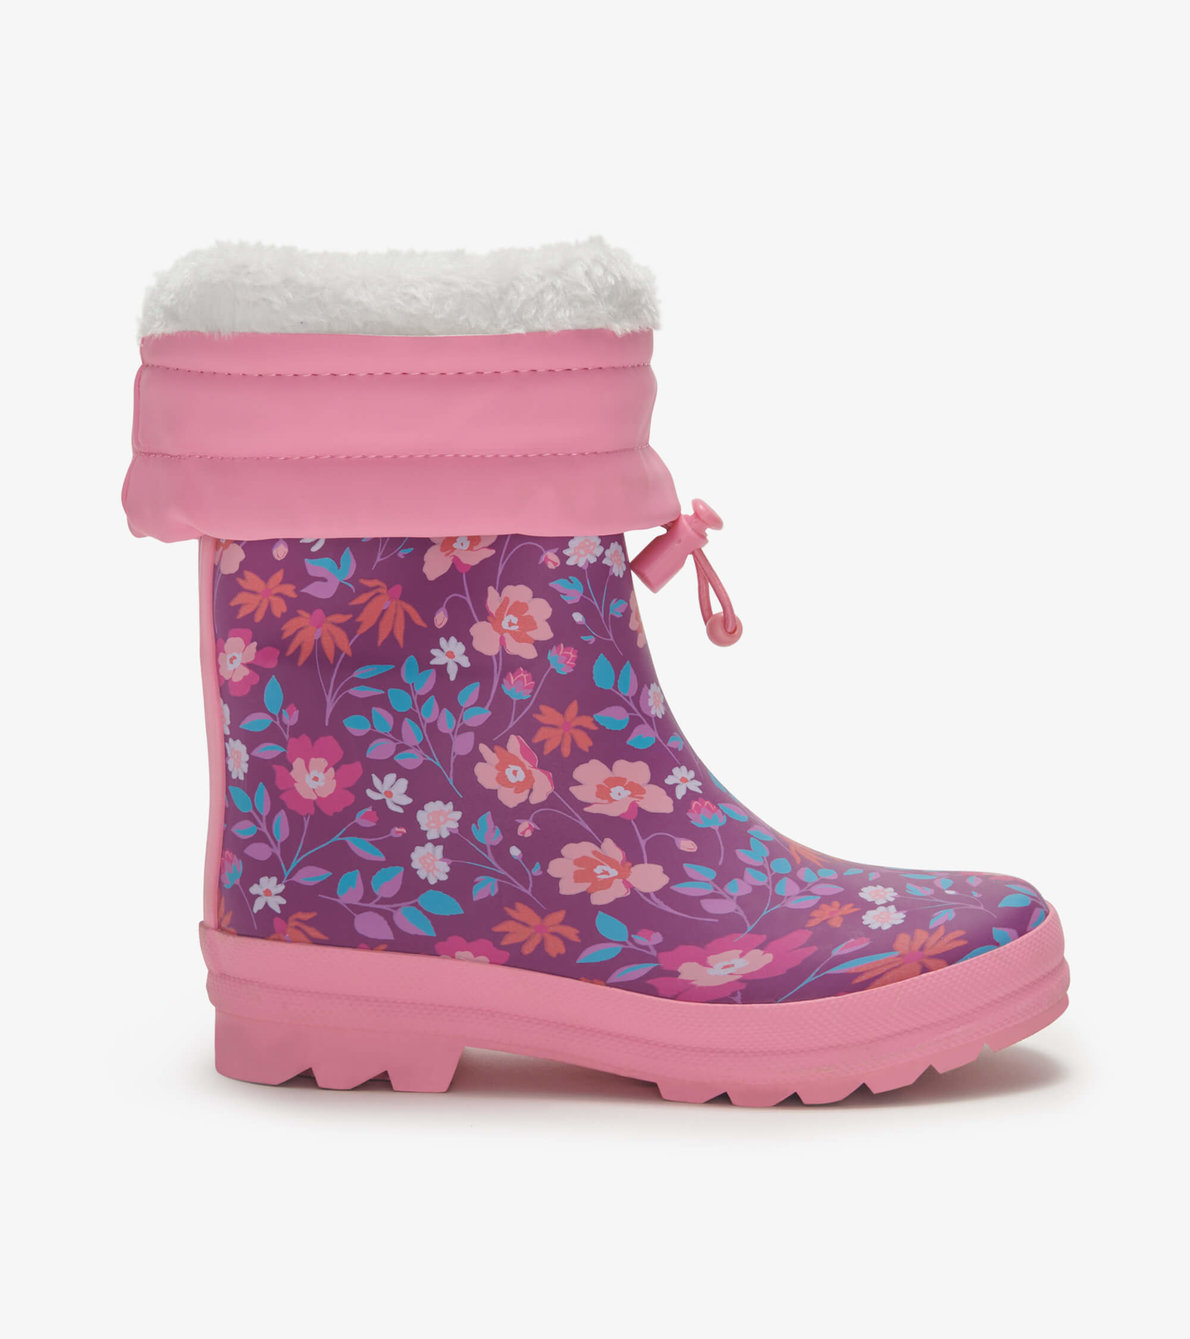 View larger image of Wild Flowers Sherpa Lined Kids Rain Boots